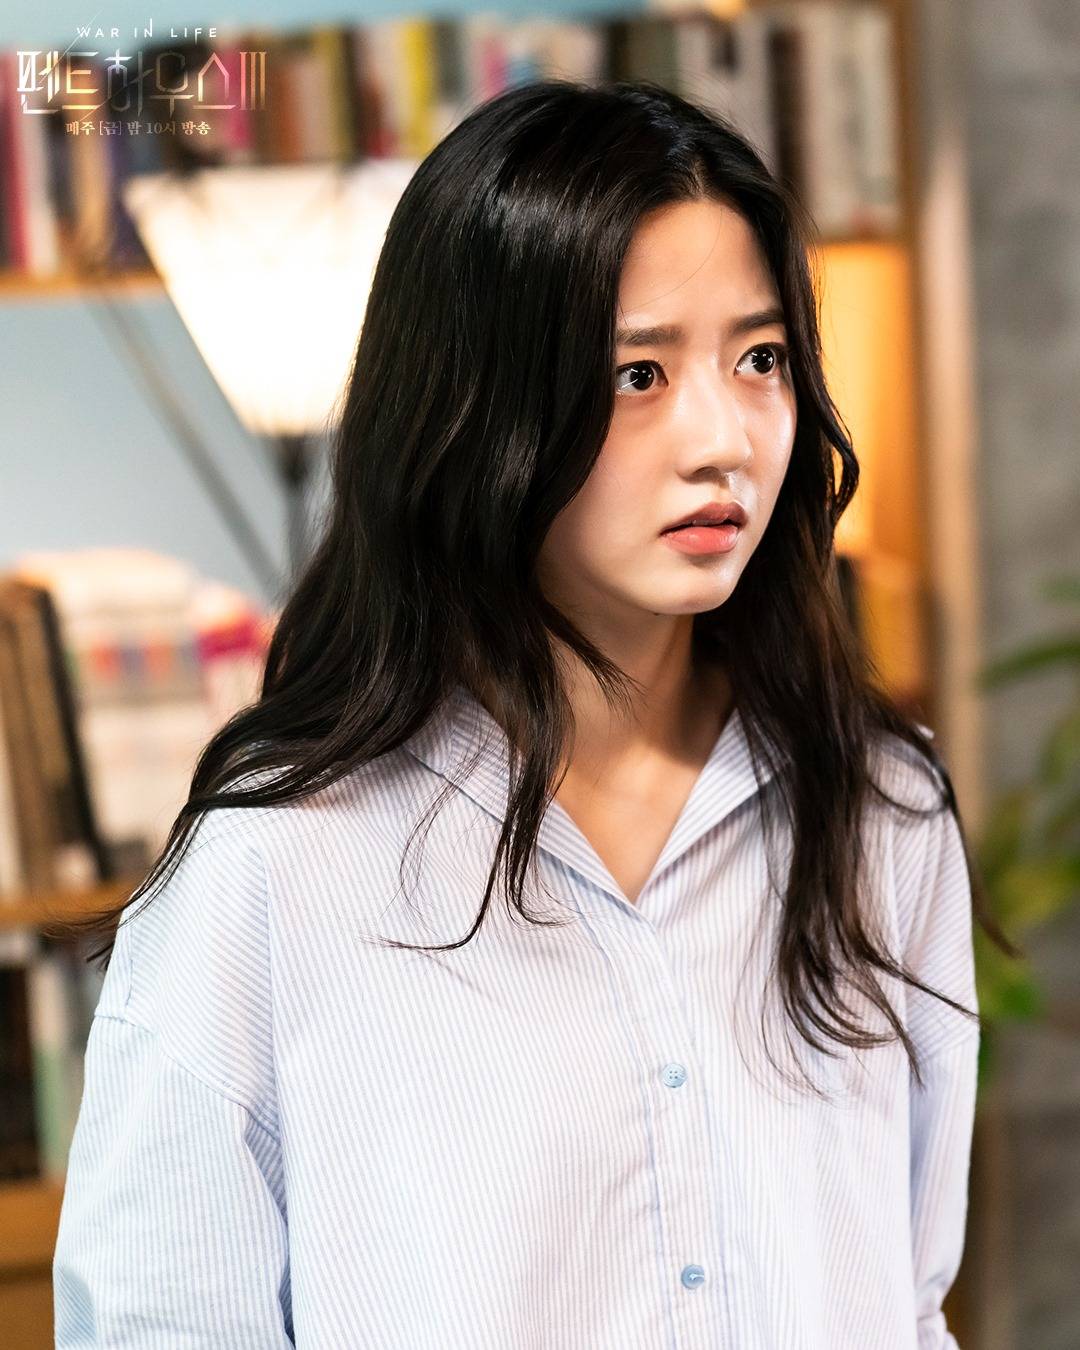 [Photos] New Stills Added for the Korean Drama 'The Penthouse 3 ...